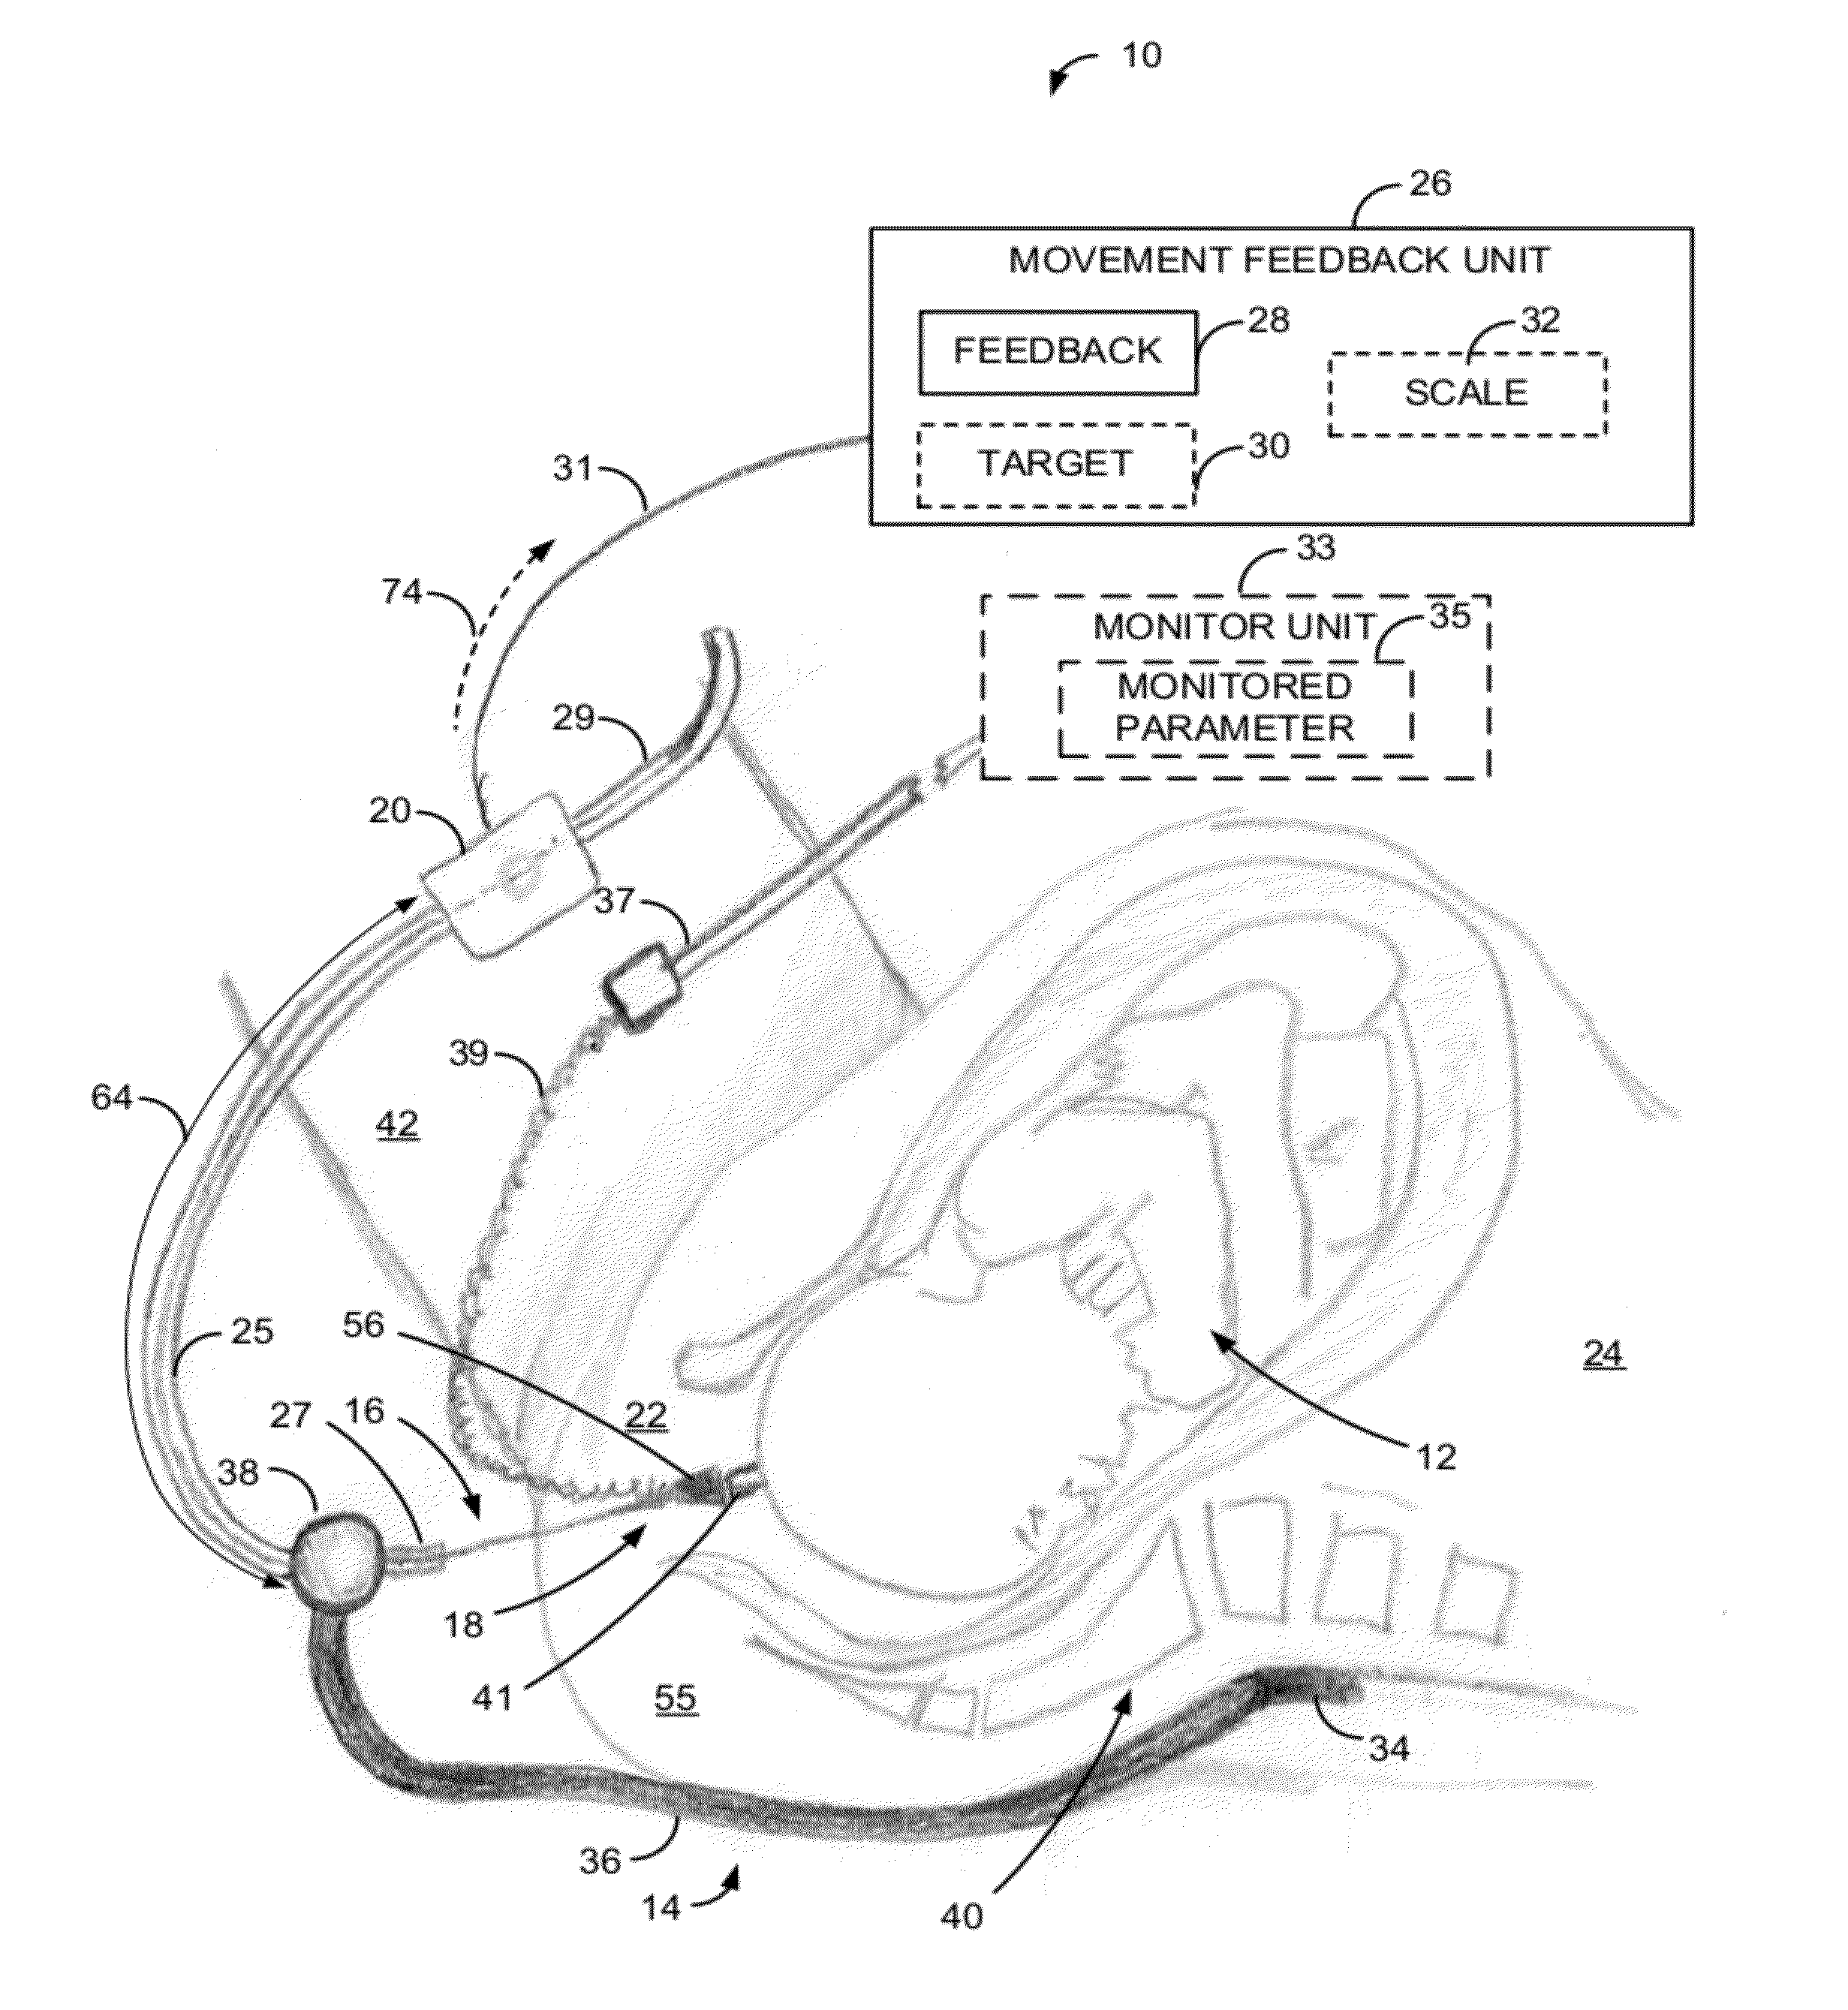 Apparatus and method of detecting movement of objects within the abdominal and/or pelvic region